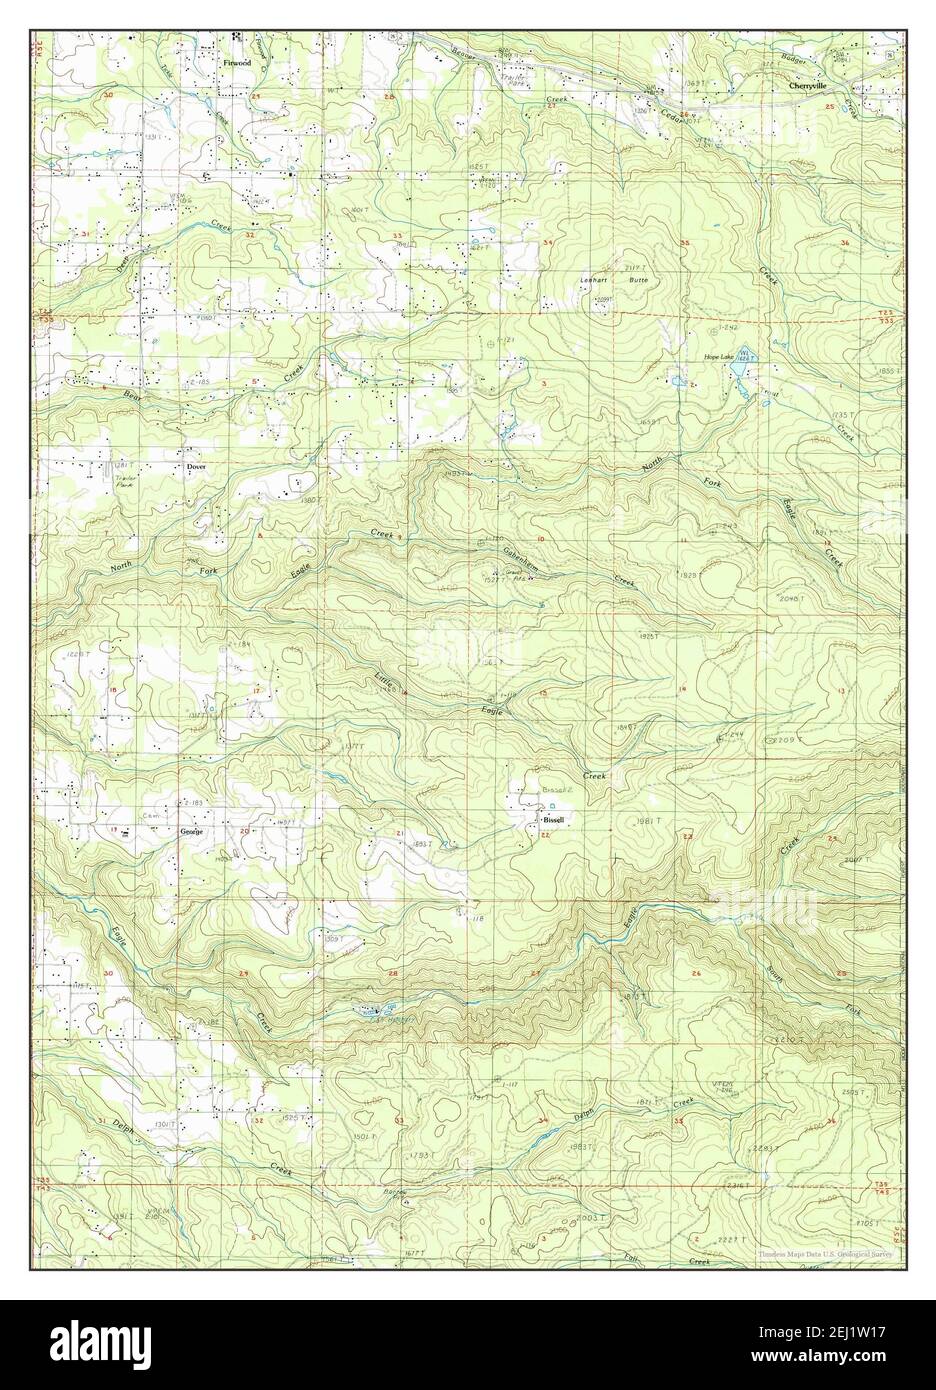 Cherryville, Oregon, map 1985, 1:24000, United States of America by Timeless Maps, data U.S. Geological Survey Stock Photo